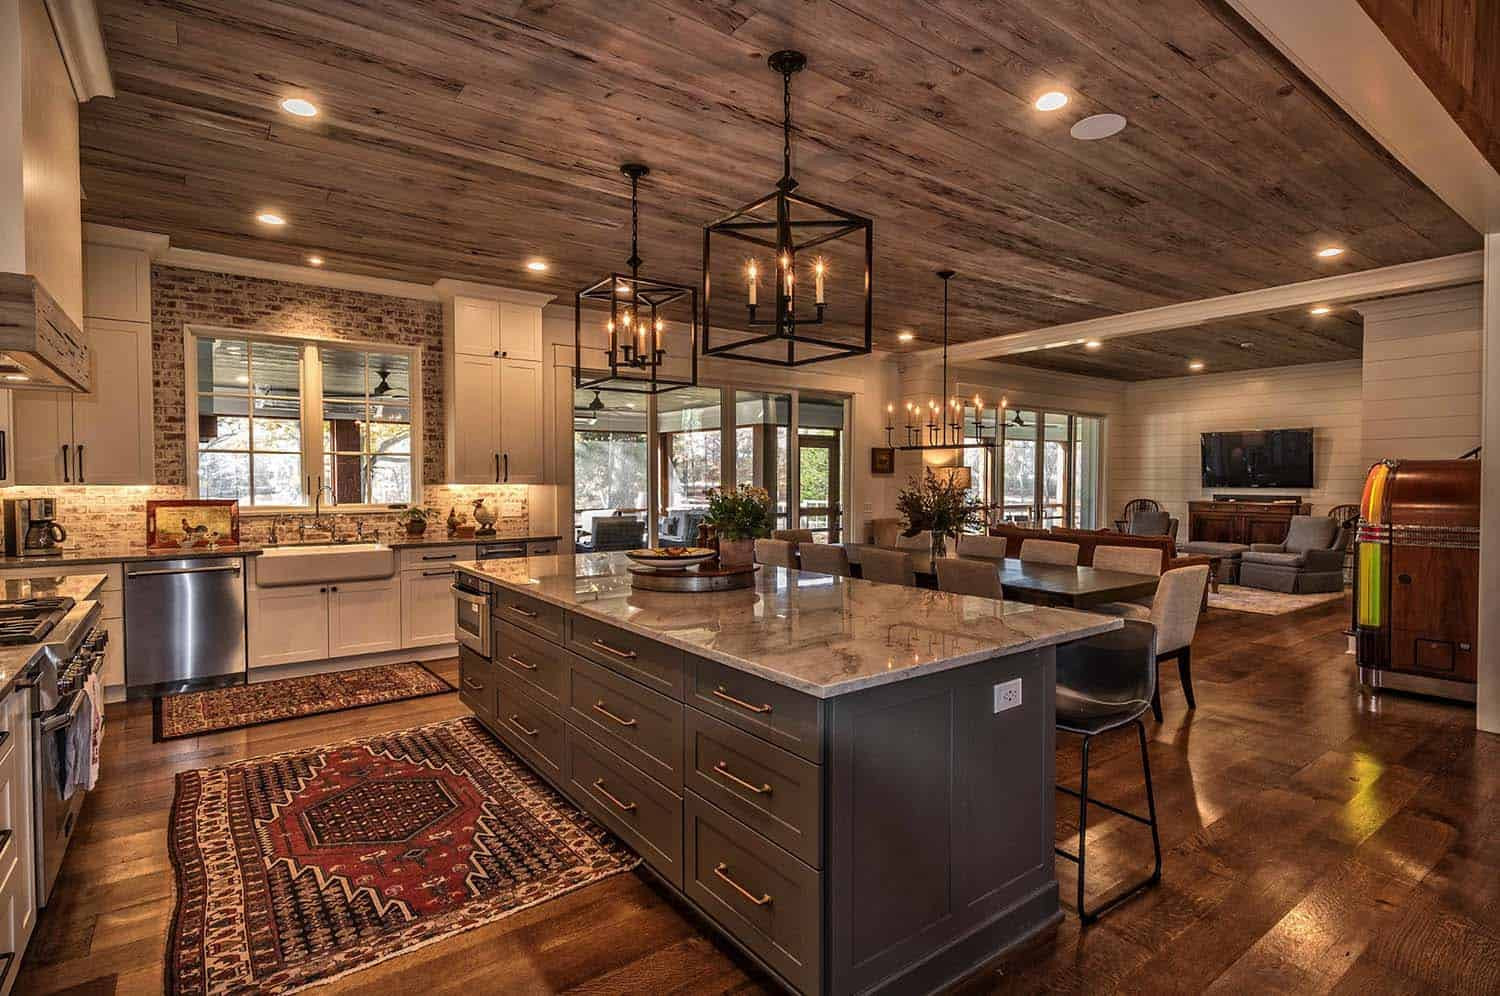 Rustic Kitchen Themes
 40 Unbelievable Rustic Kitchen Design Ideas To Steal